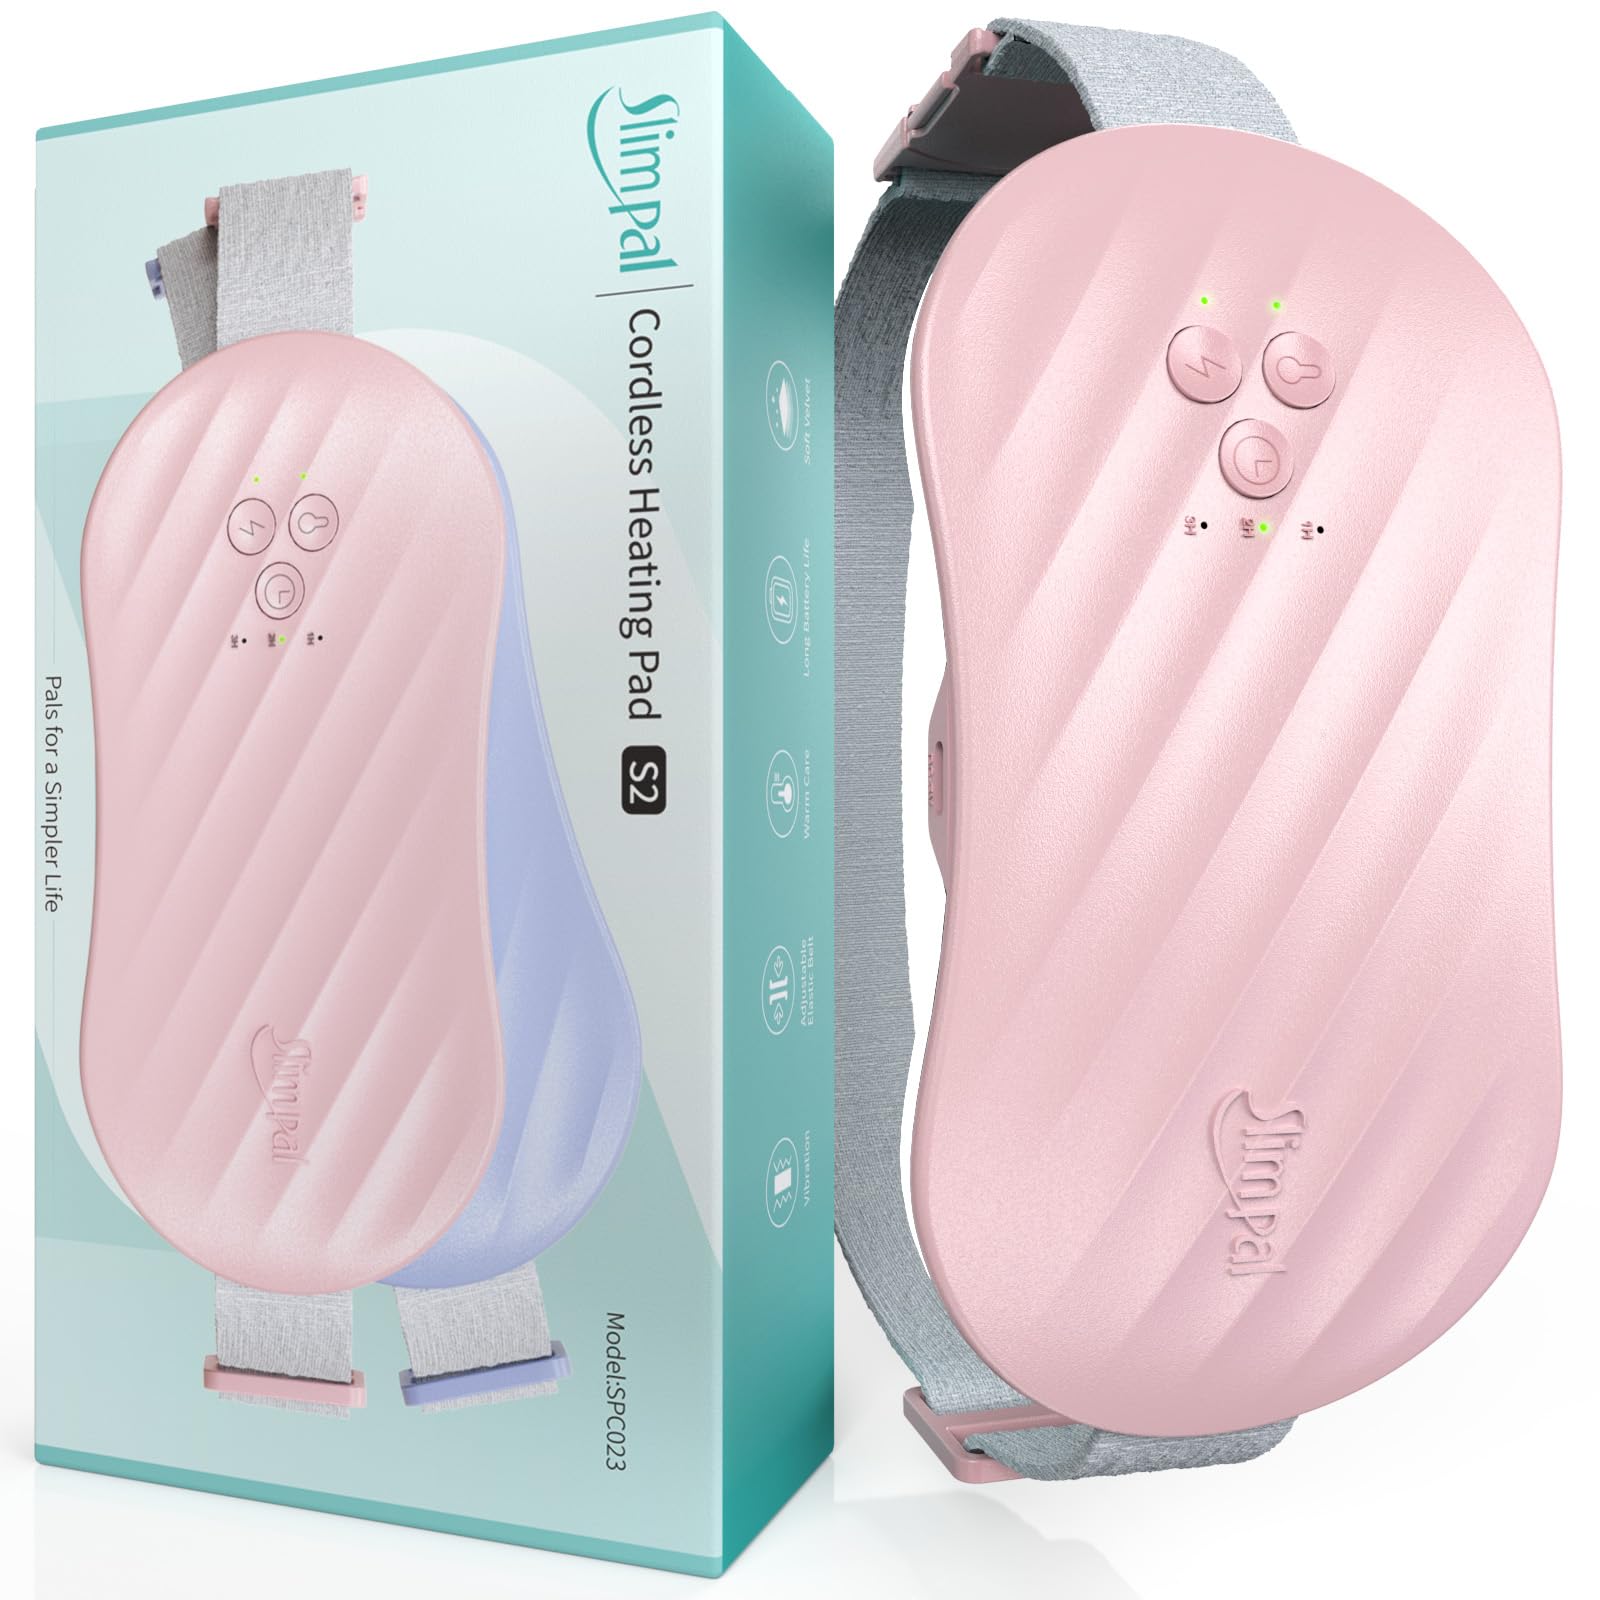 slimpal cordless heating pad s2 for period cramp pain pink